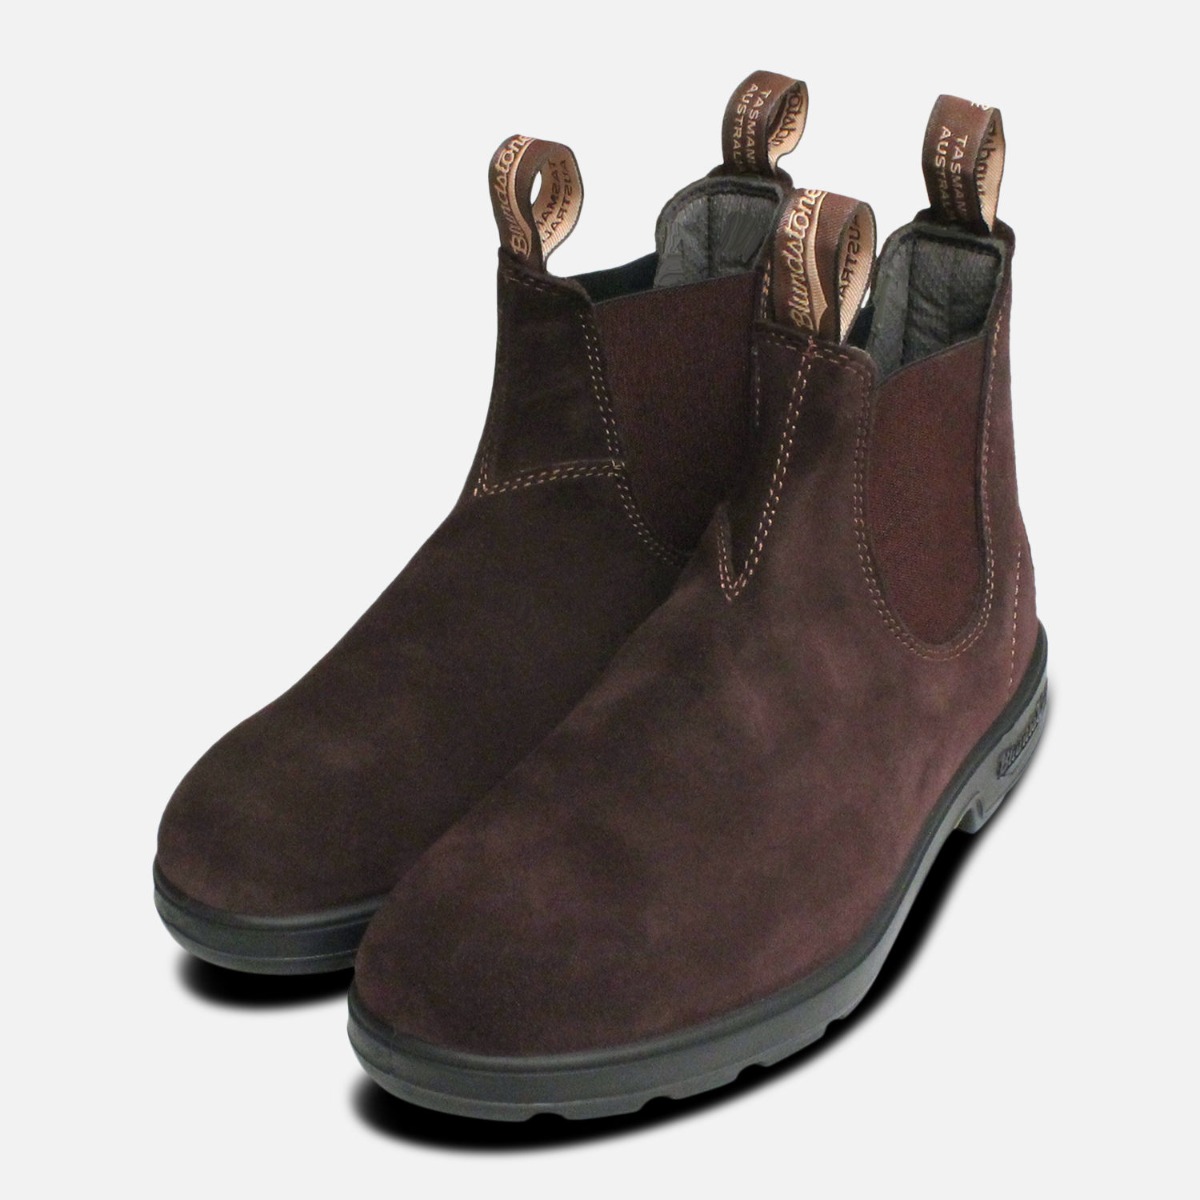 blundstone suede chelsea boots